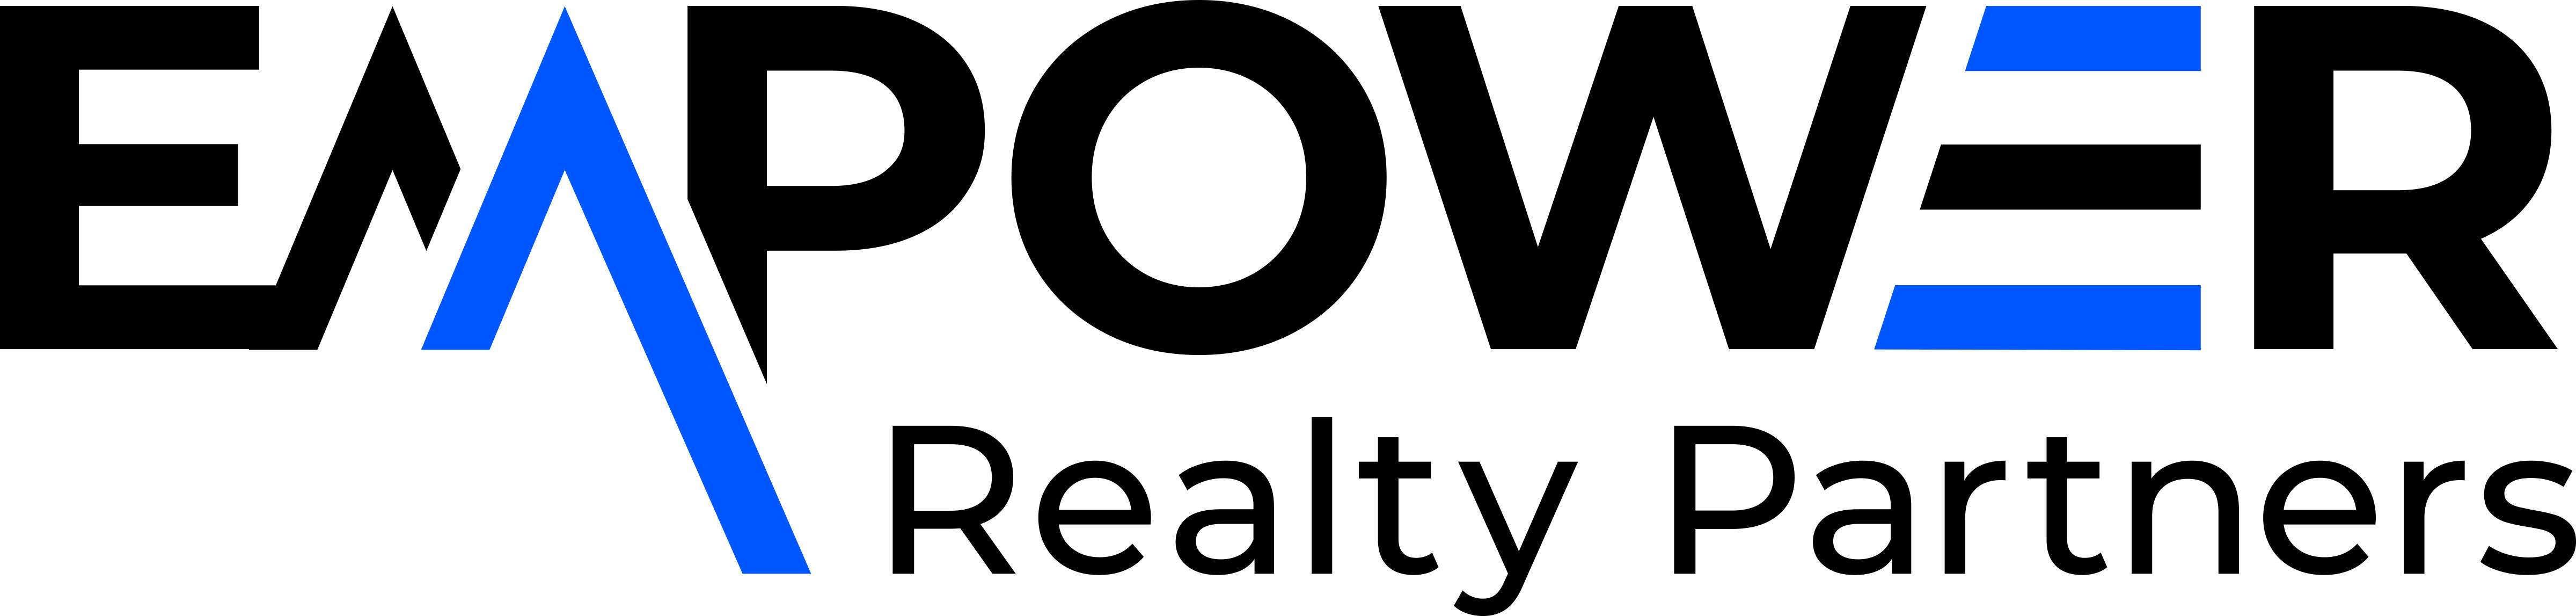 Empower Realty Partners